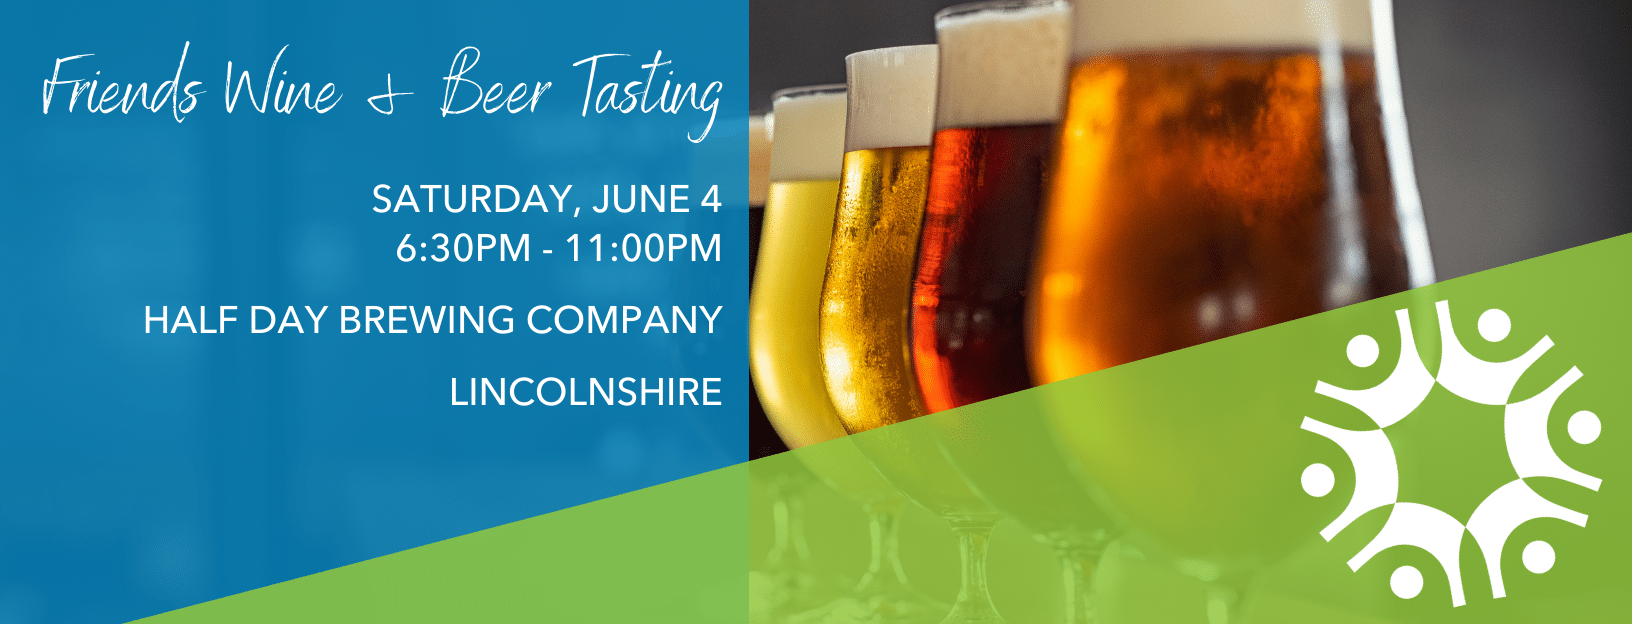 Friends Wine and Beer Tasting Event - Saturday, June 4. 6:30-11:00PM. Half Day Brewing Company in Lincolnshire. Learn more by clicking button.